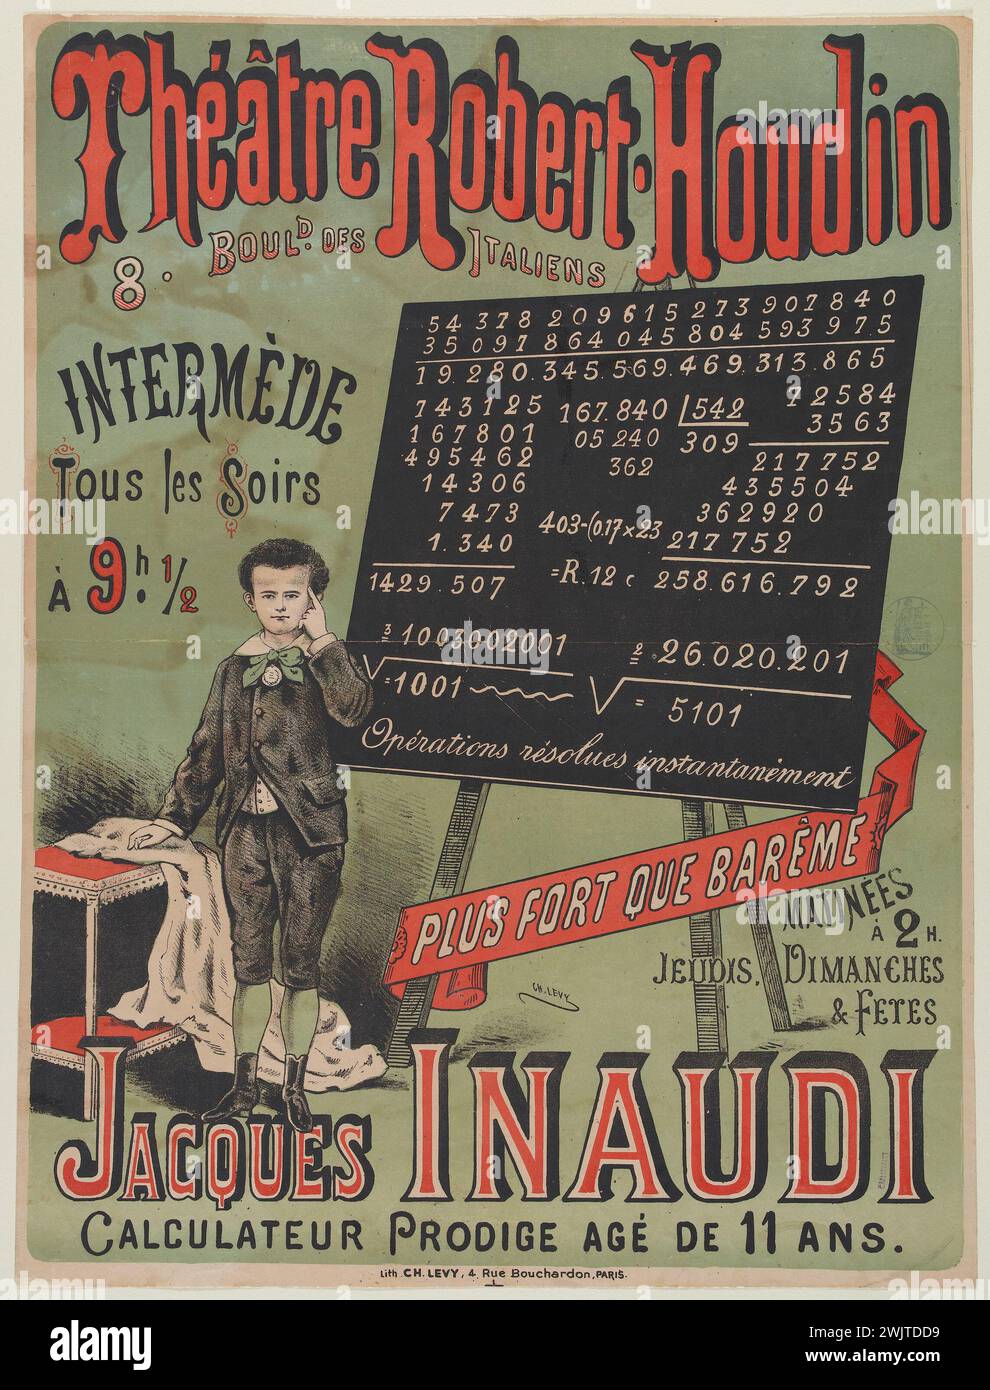 Charles Lévy. 'Robert-Houdin Theater, Jacques Enaudi'. Lithography, 1878. Paris, Carnavalet museum. 50821-8 Advertising poster, mental calculation, Italian calculator, child, young, lithography, mathematical operation, advertising, theater Robert-Houdin Stock Photo